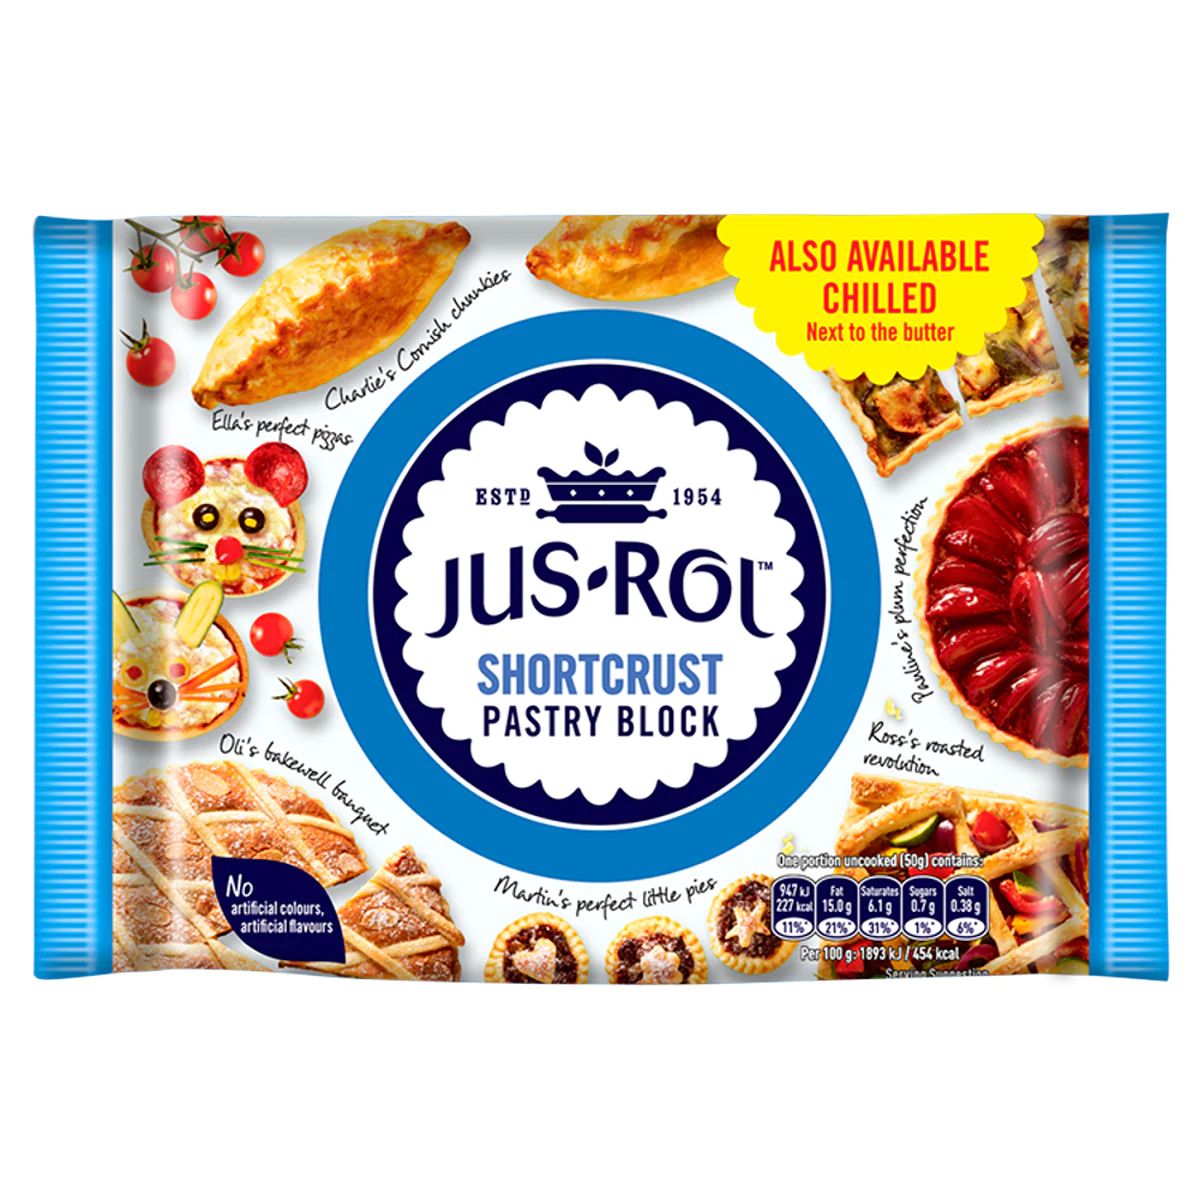 A package of Jus-Rol Shortcrust Pastry Block - 500g showcasing various pastry dishes on the cover.